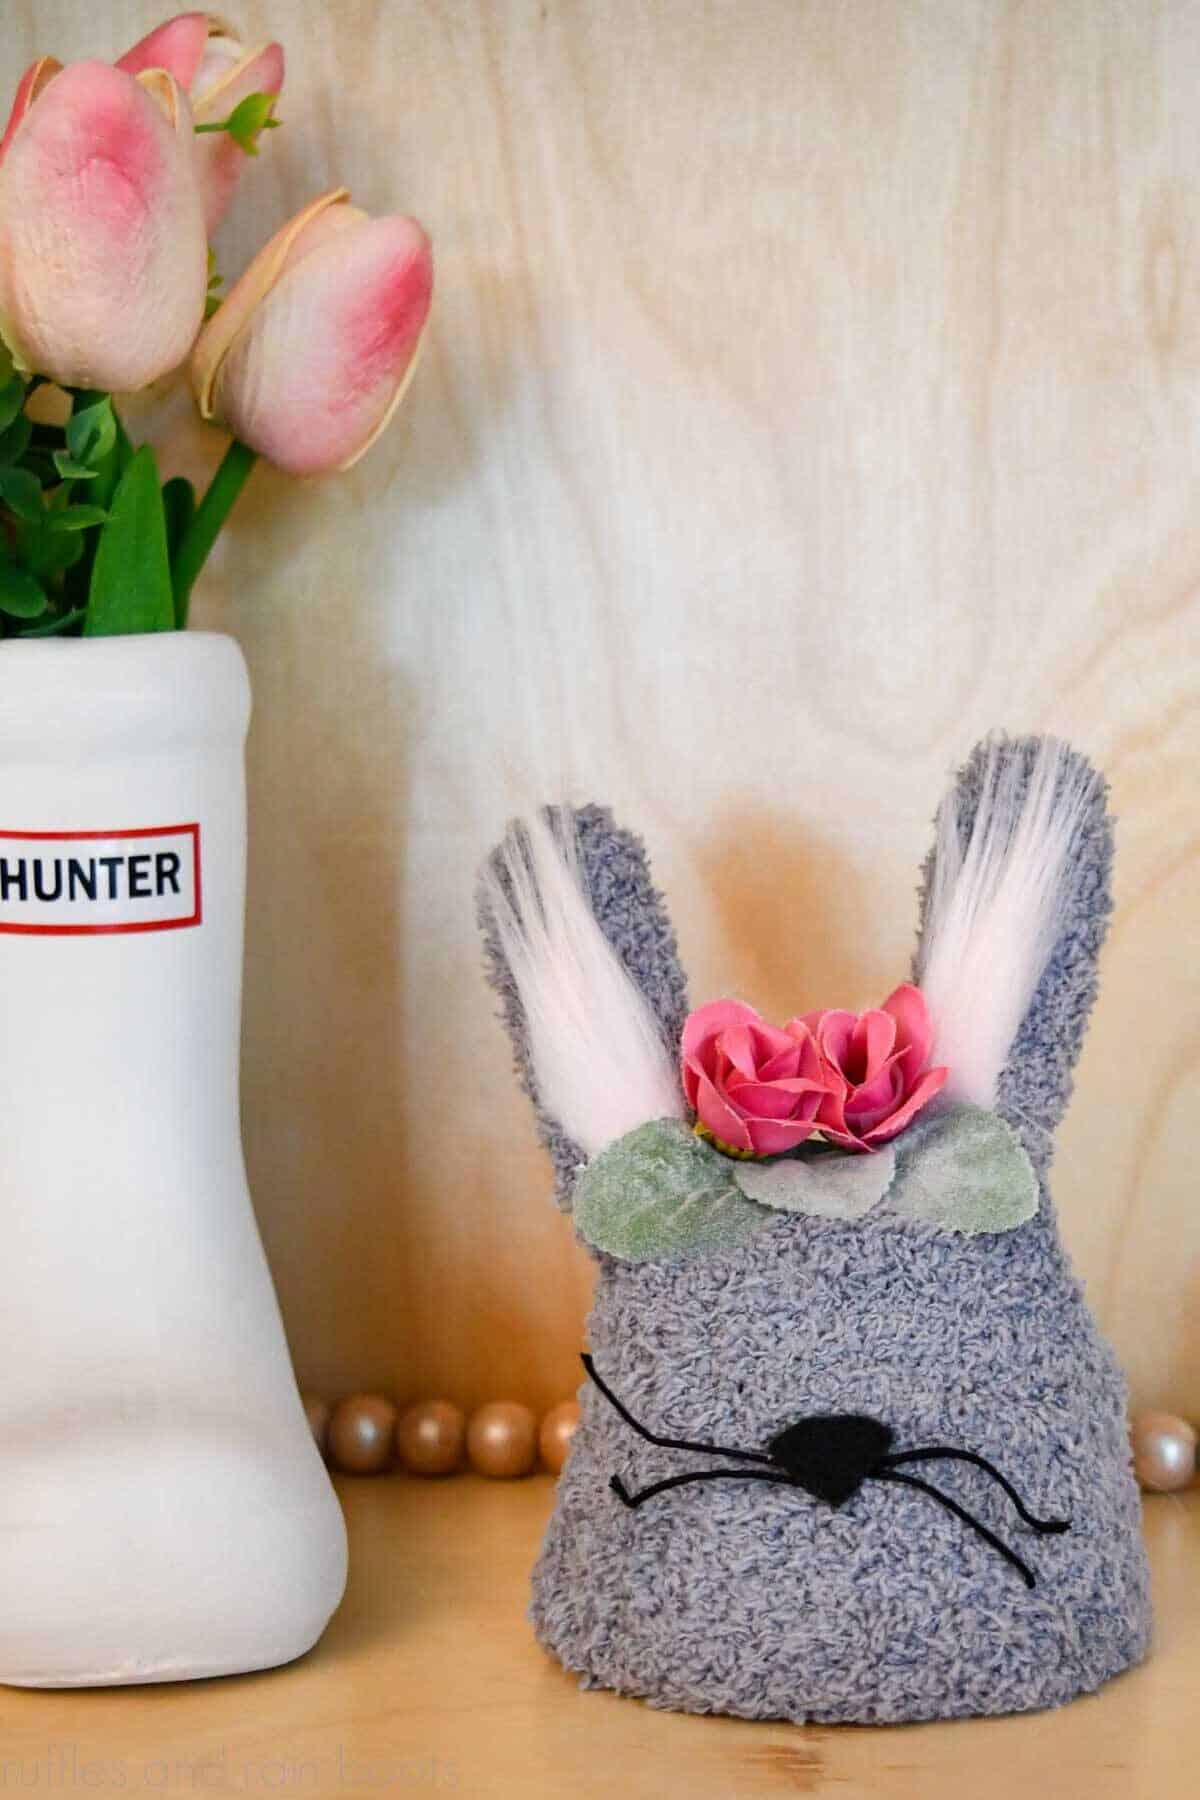 Vertical image of a gray tiered tray bunny craft made from a glove and clay pot standing in front of a wood background next to a white rain boot planter with tulips.